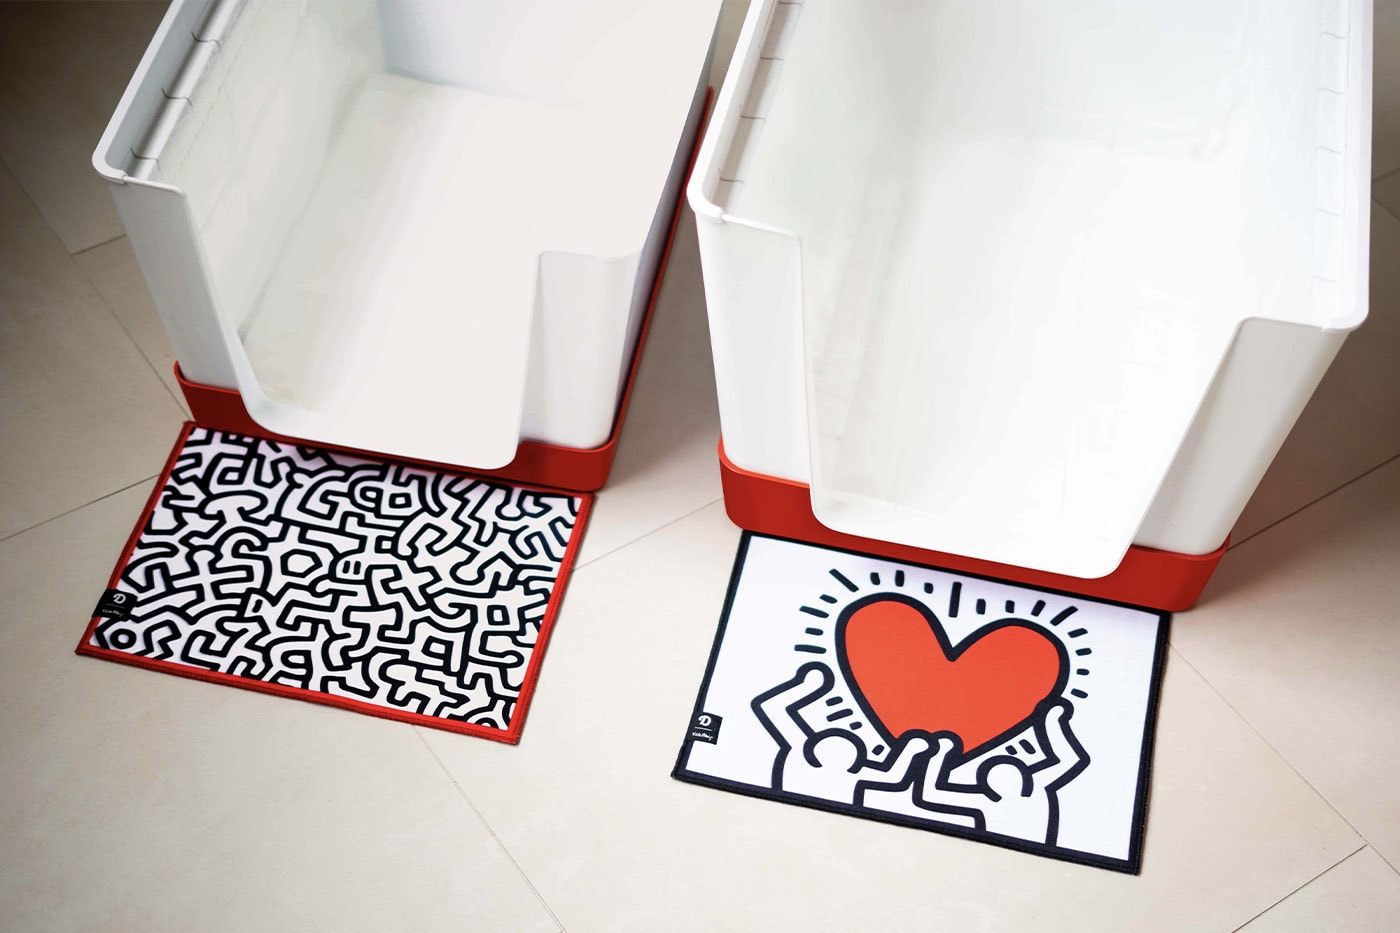 Doggy Bathroom's Elevated Litter Box Pays Homage to the Great Keith Haring